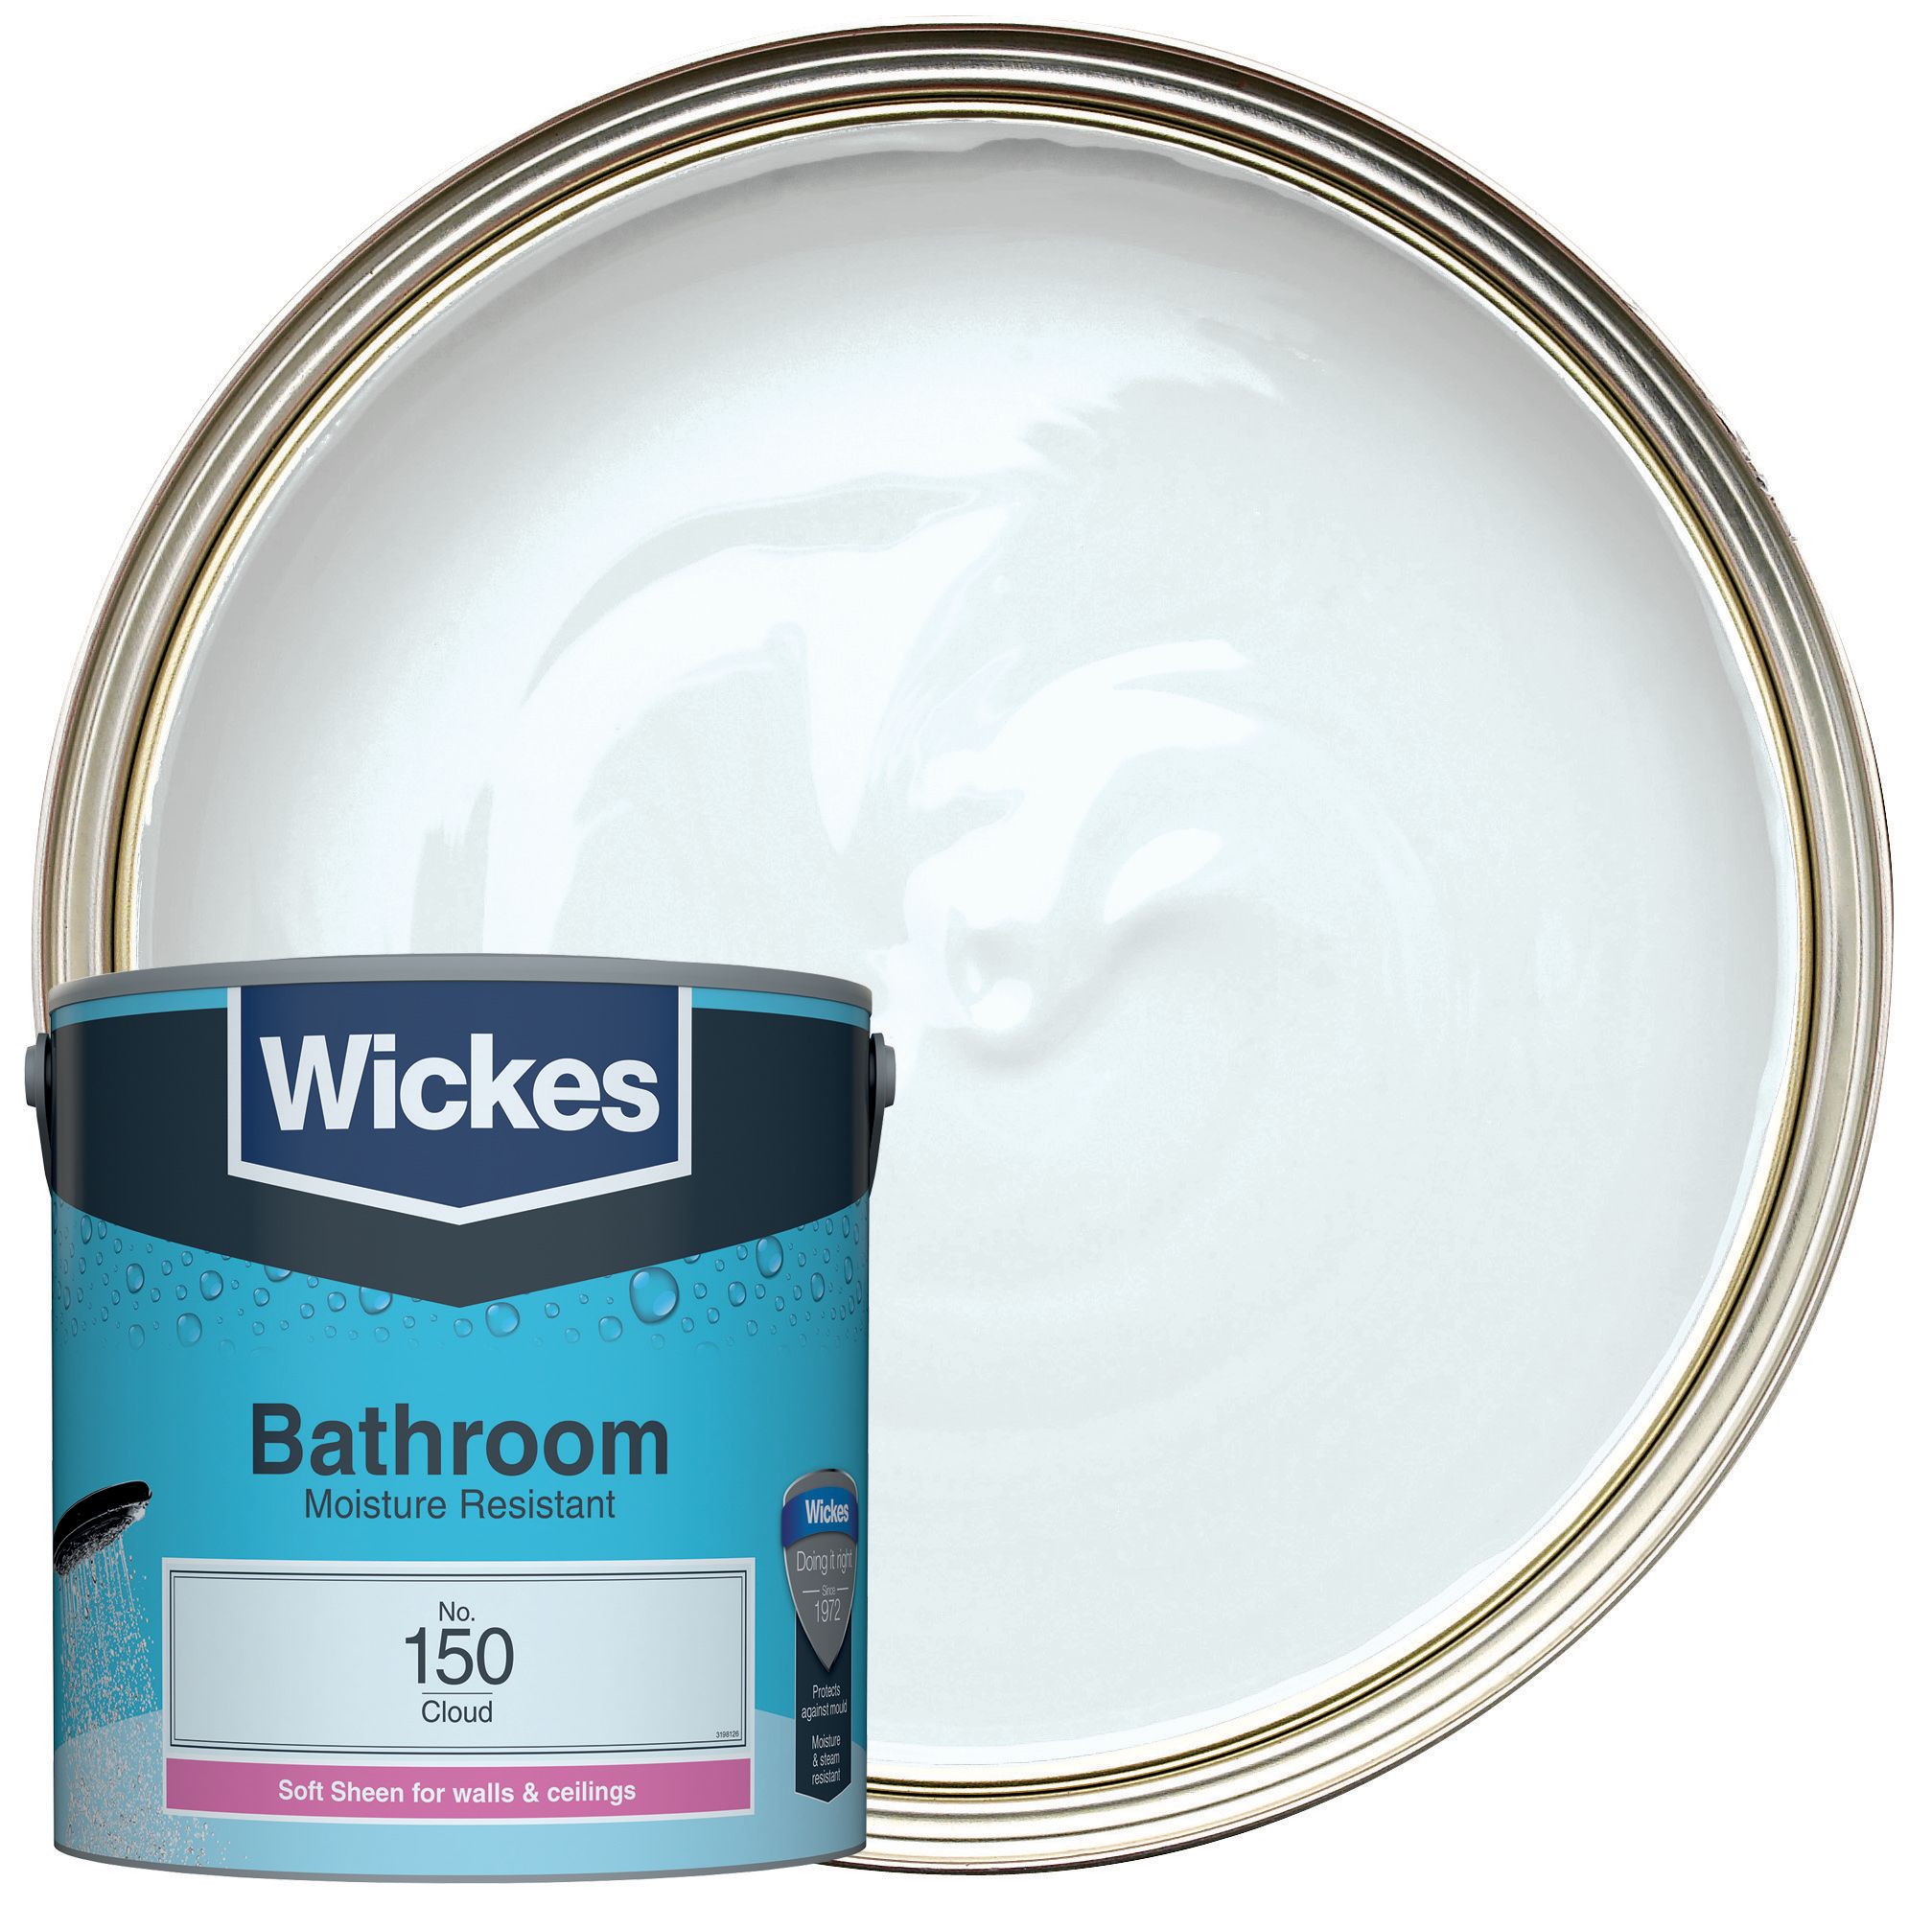 Image of Wickes Bathroom Soft Sheen Emulsion Paint - Cloud No.150 - 2.5L